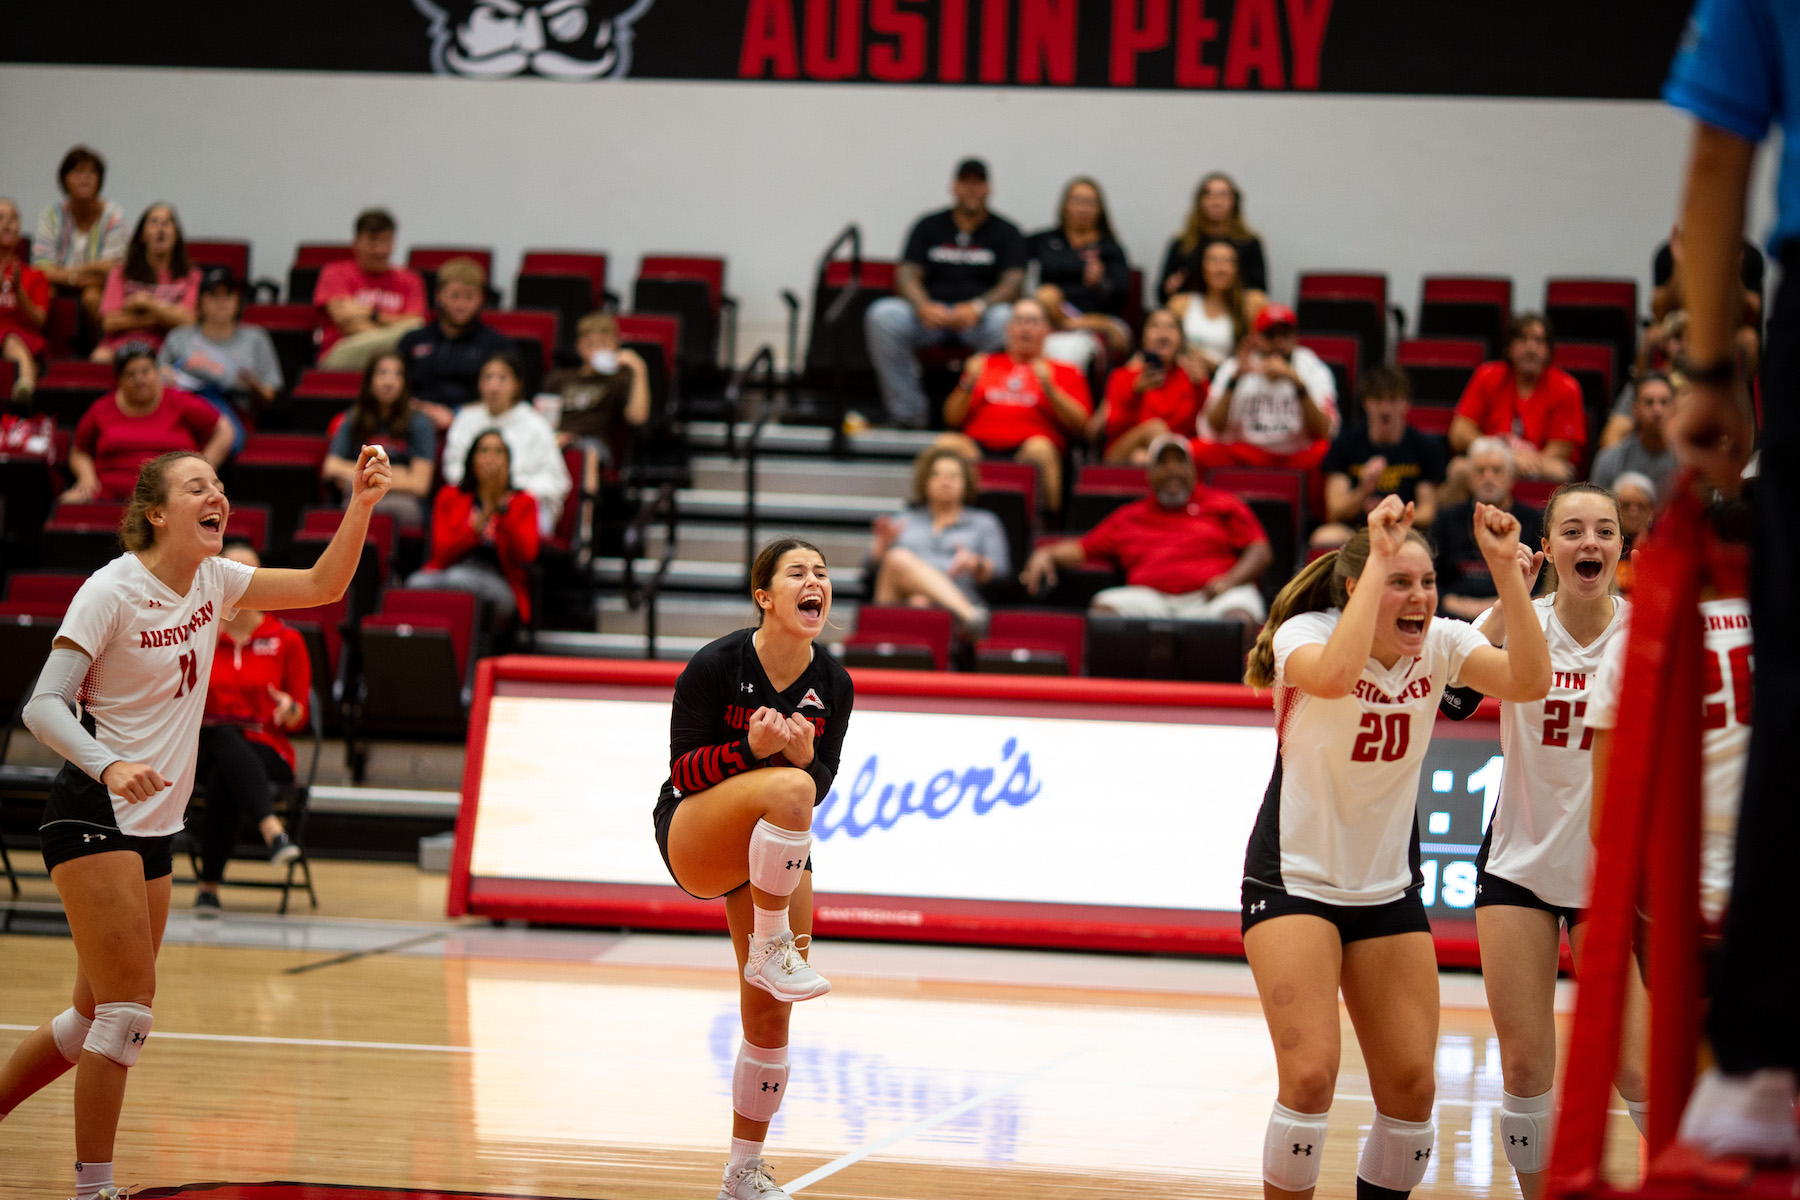 The Govs volleyball team celebrates a successful set during their 3-1 victory over North Dakota State University on Friday, Sept. 16.  Ally Shemwell | Intern 